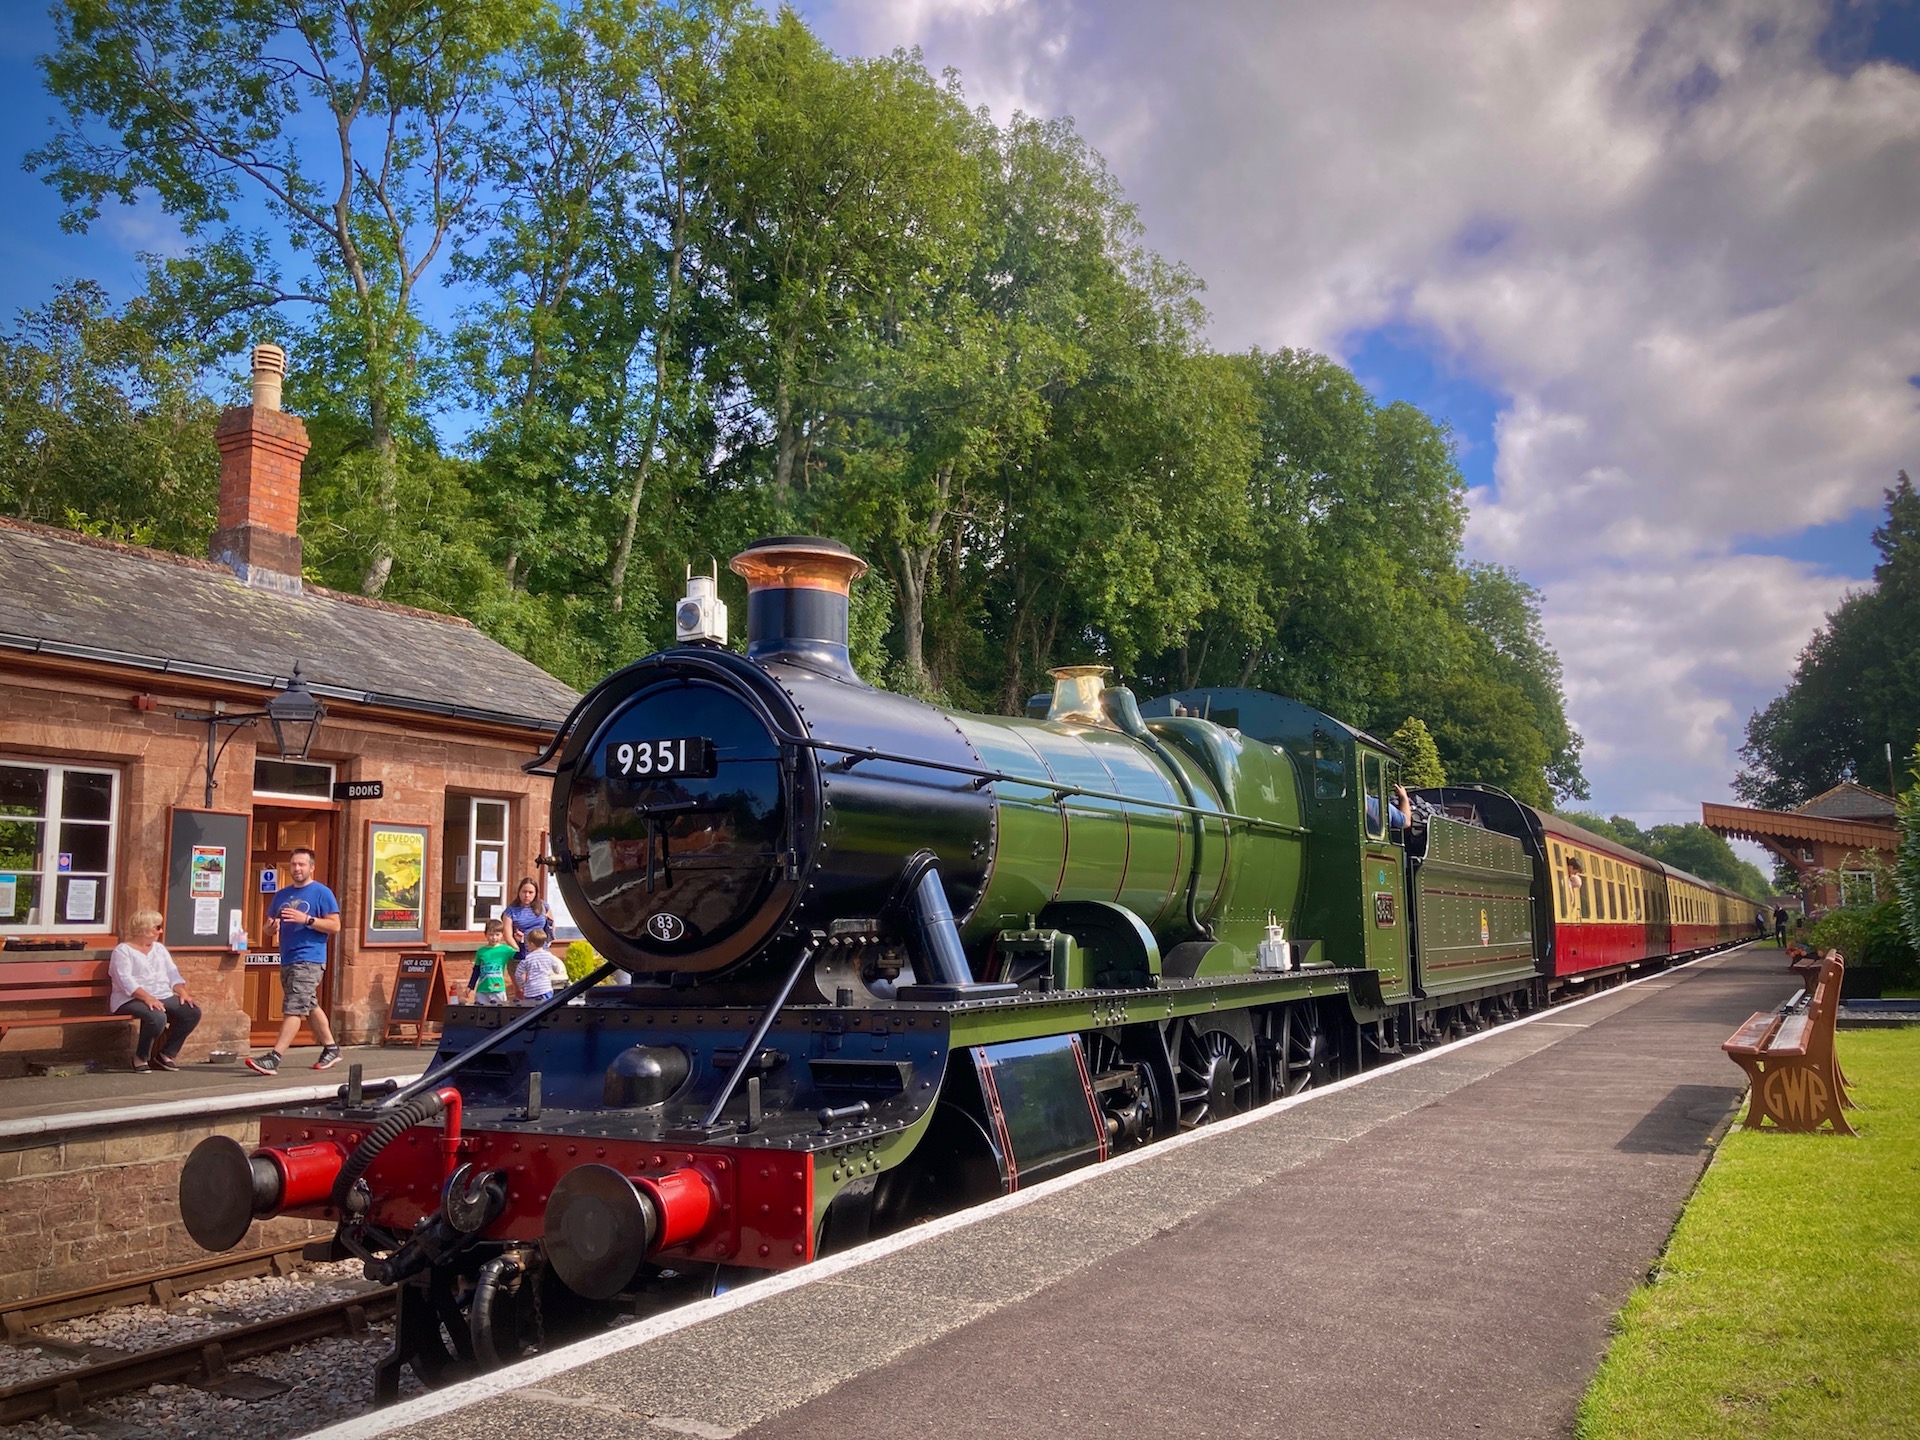 A large steam engines pulling a long line of carriages pauses at Crowcombe station in Somerset.